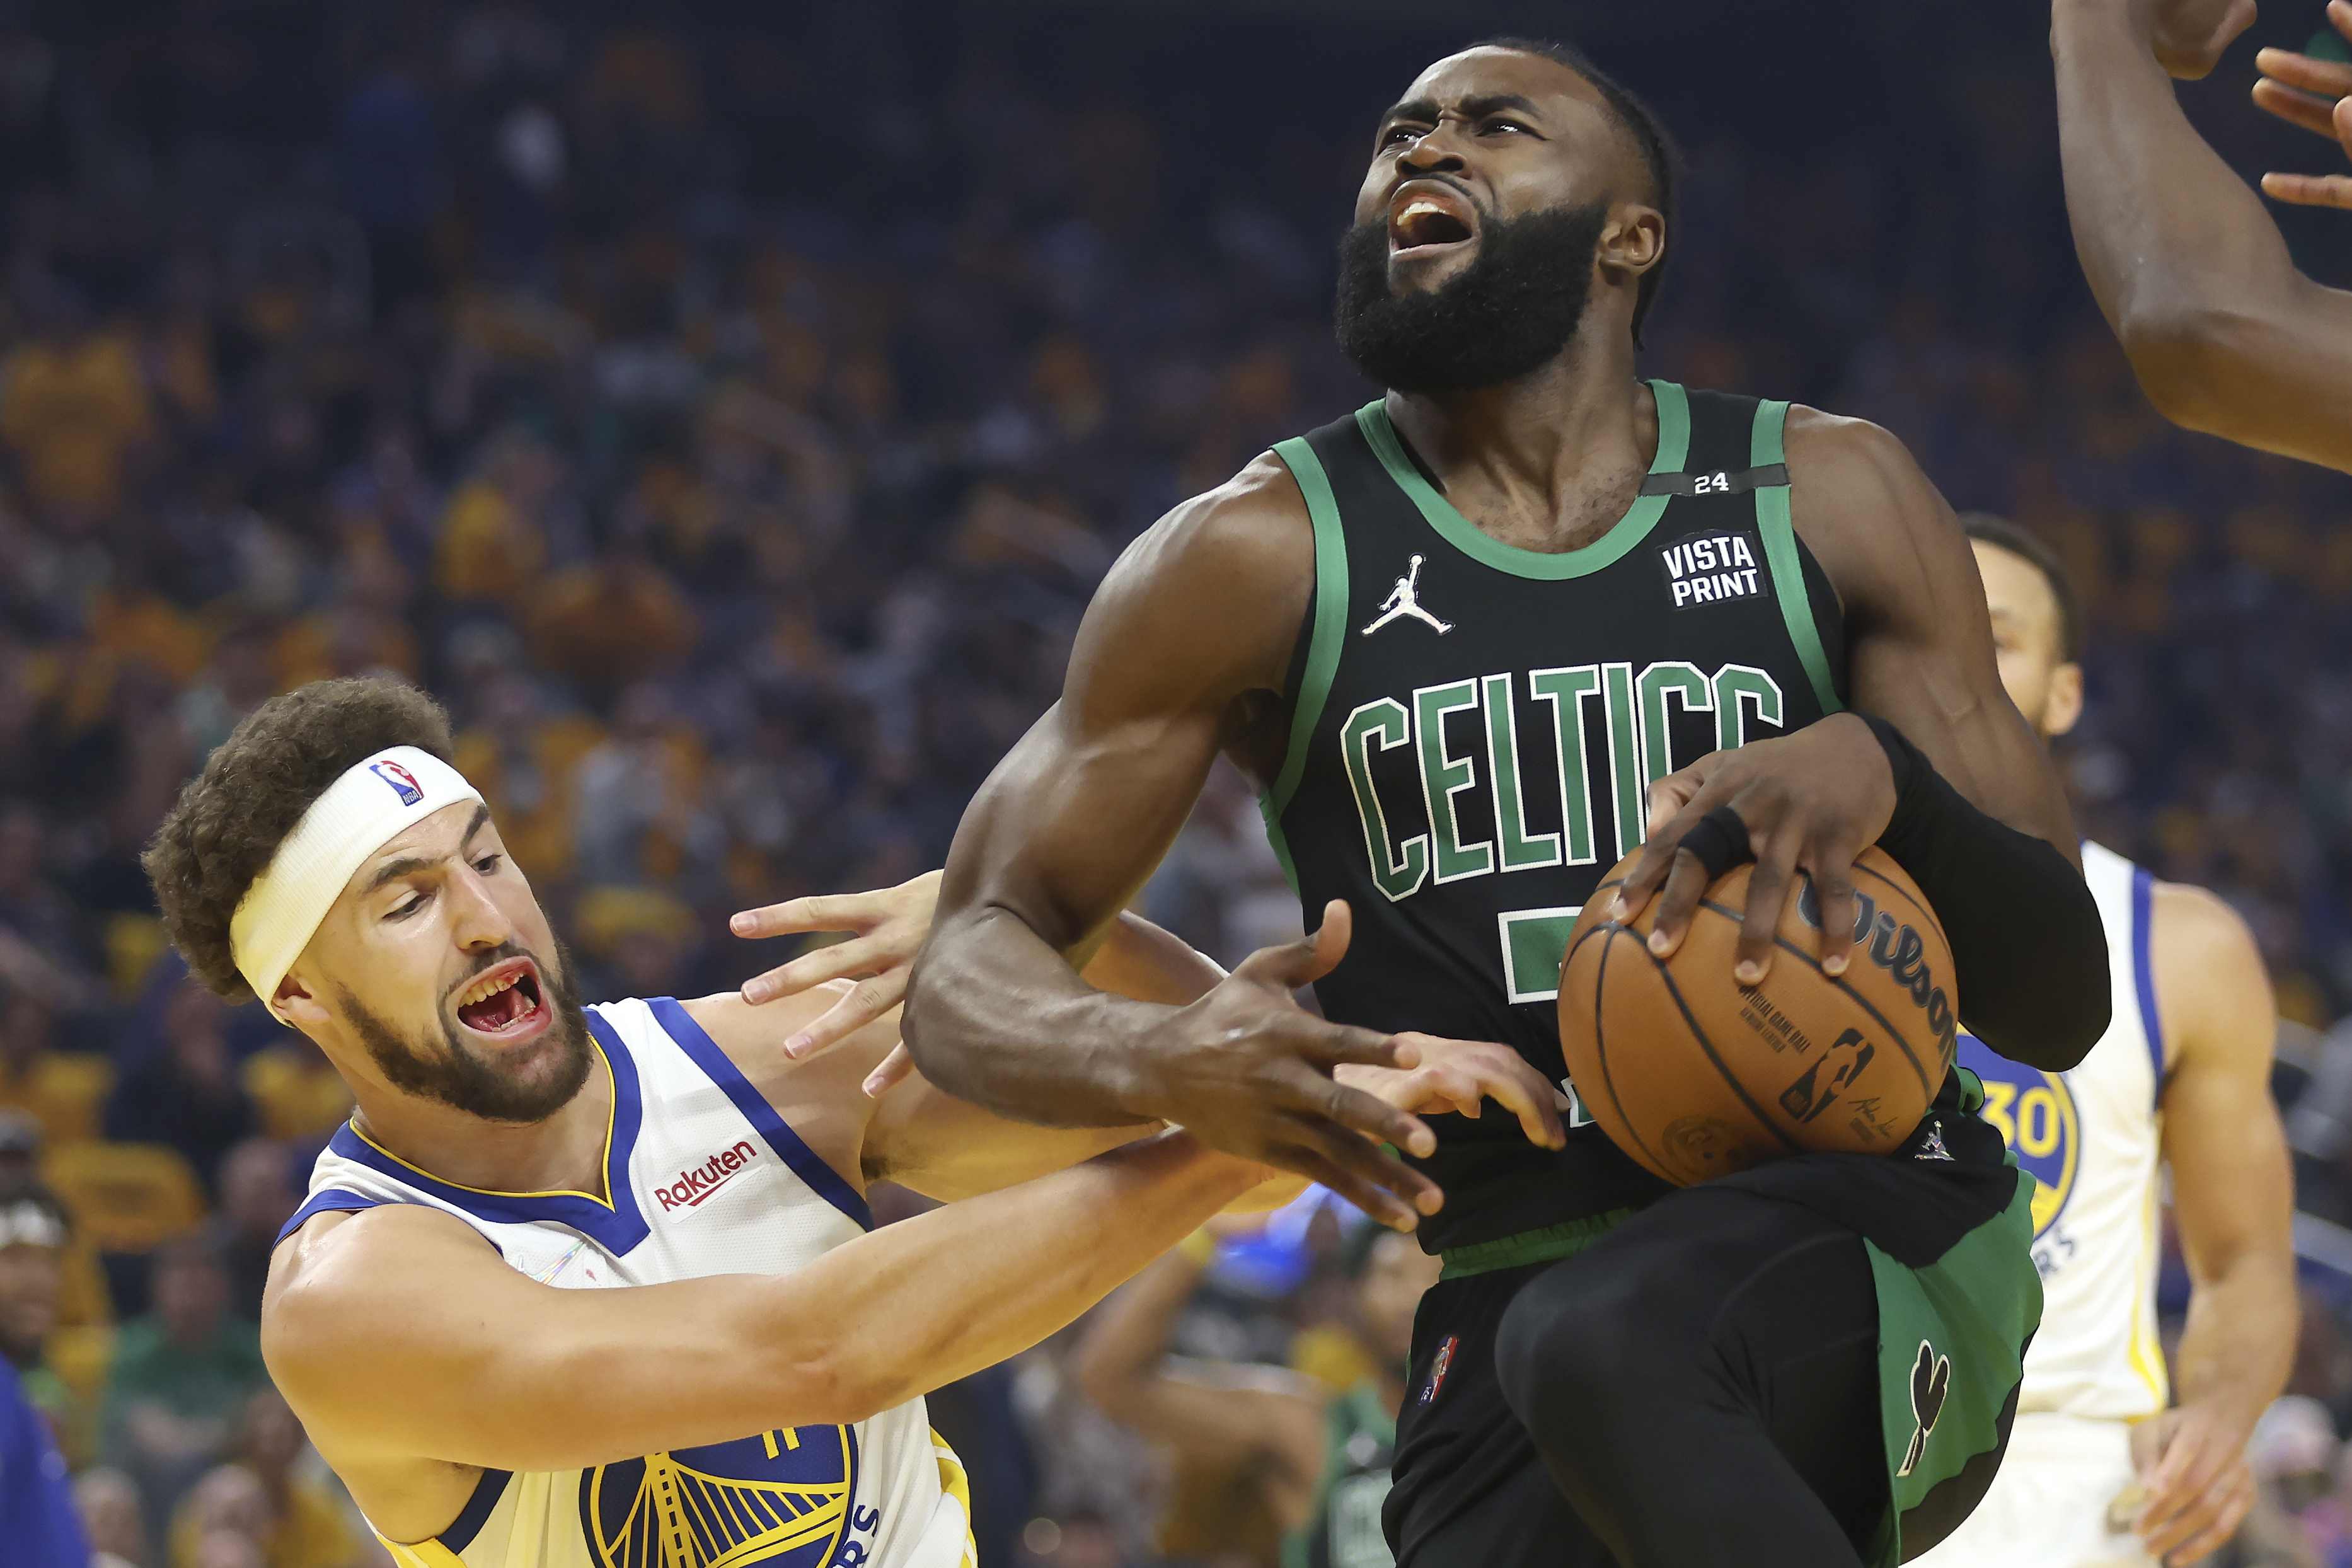 Golden State Beats Boston Celtics in Game 2 of NBA Finals - The